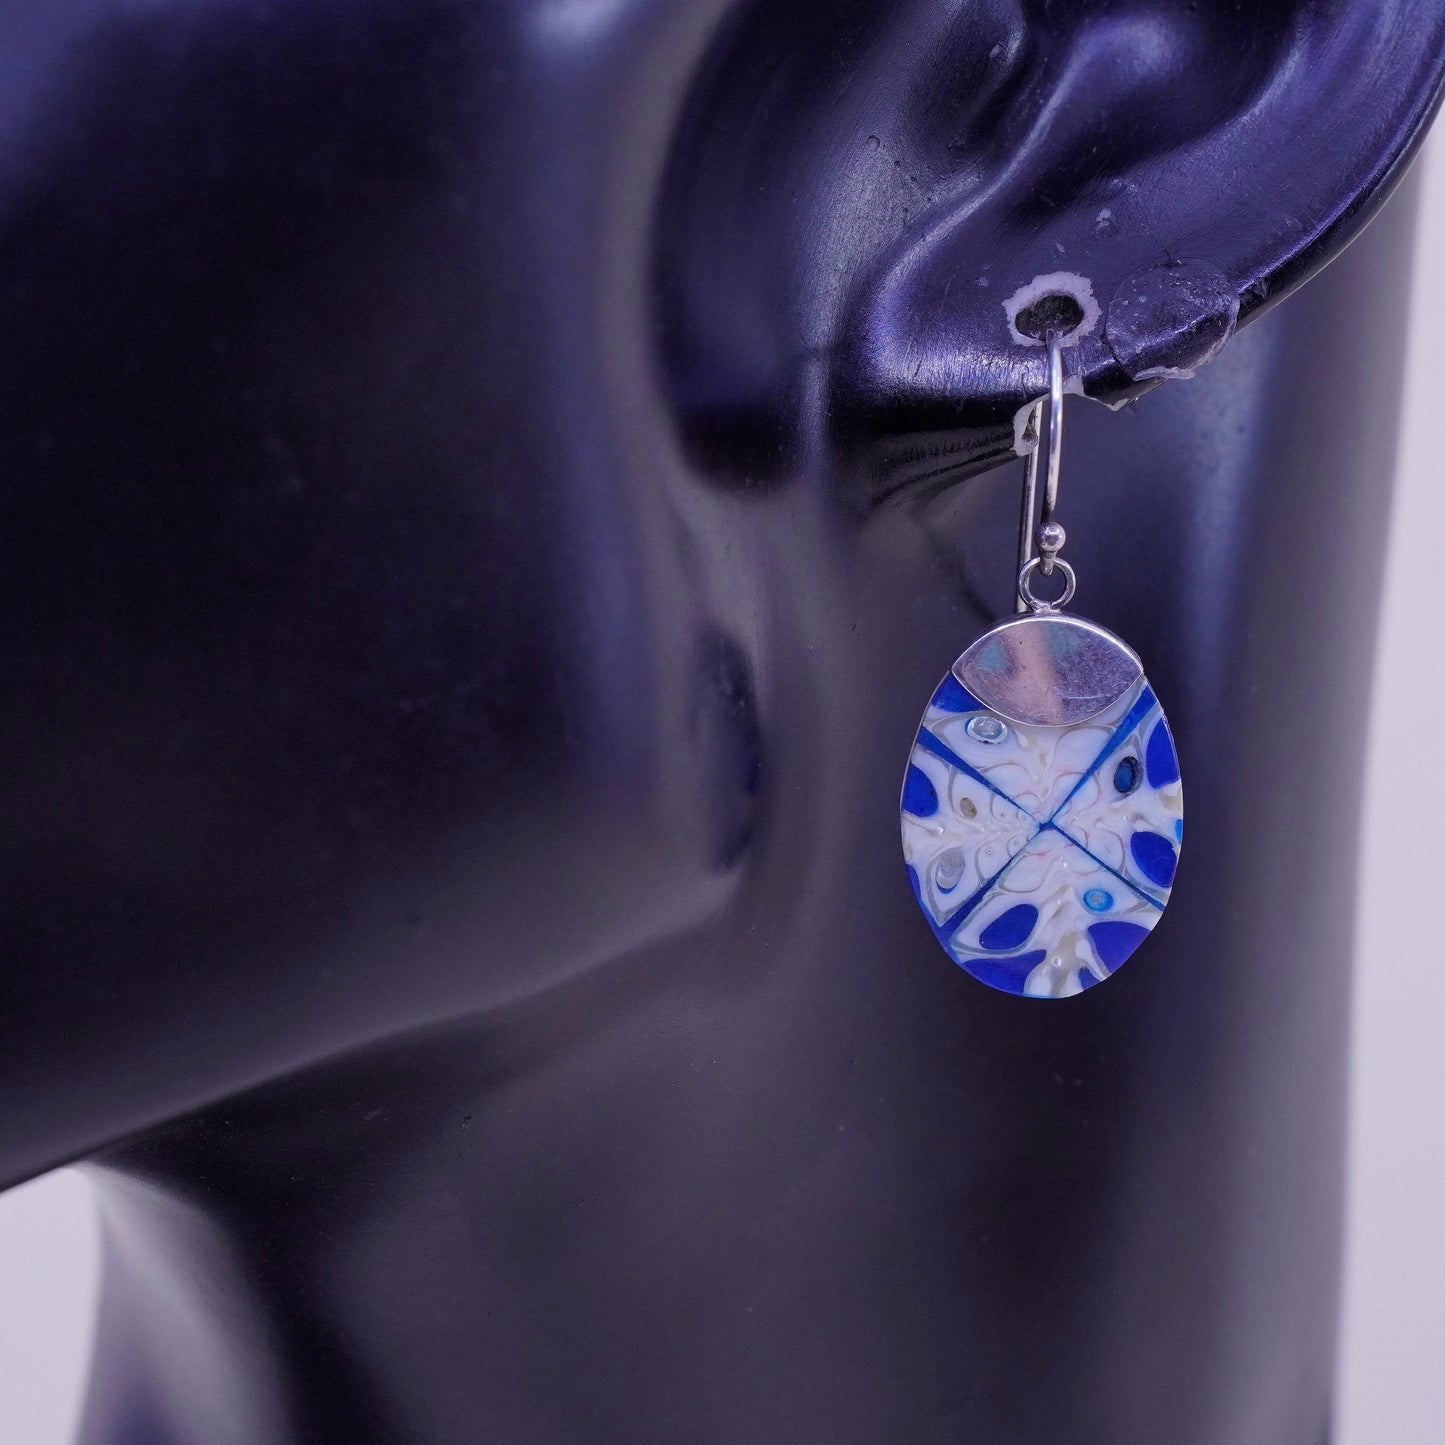 Vintage Mexico sterling 925 silver handmade earrings with blue resin